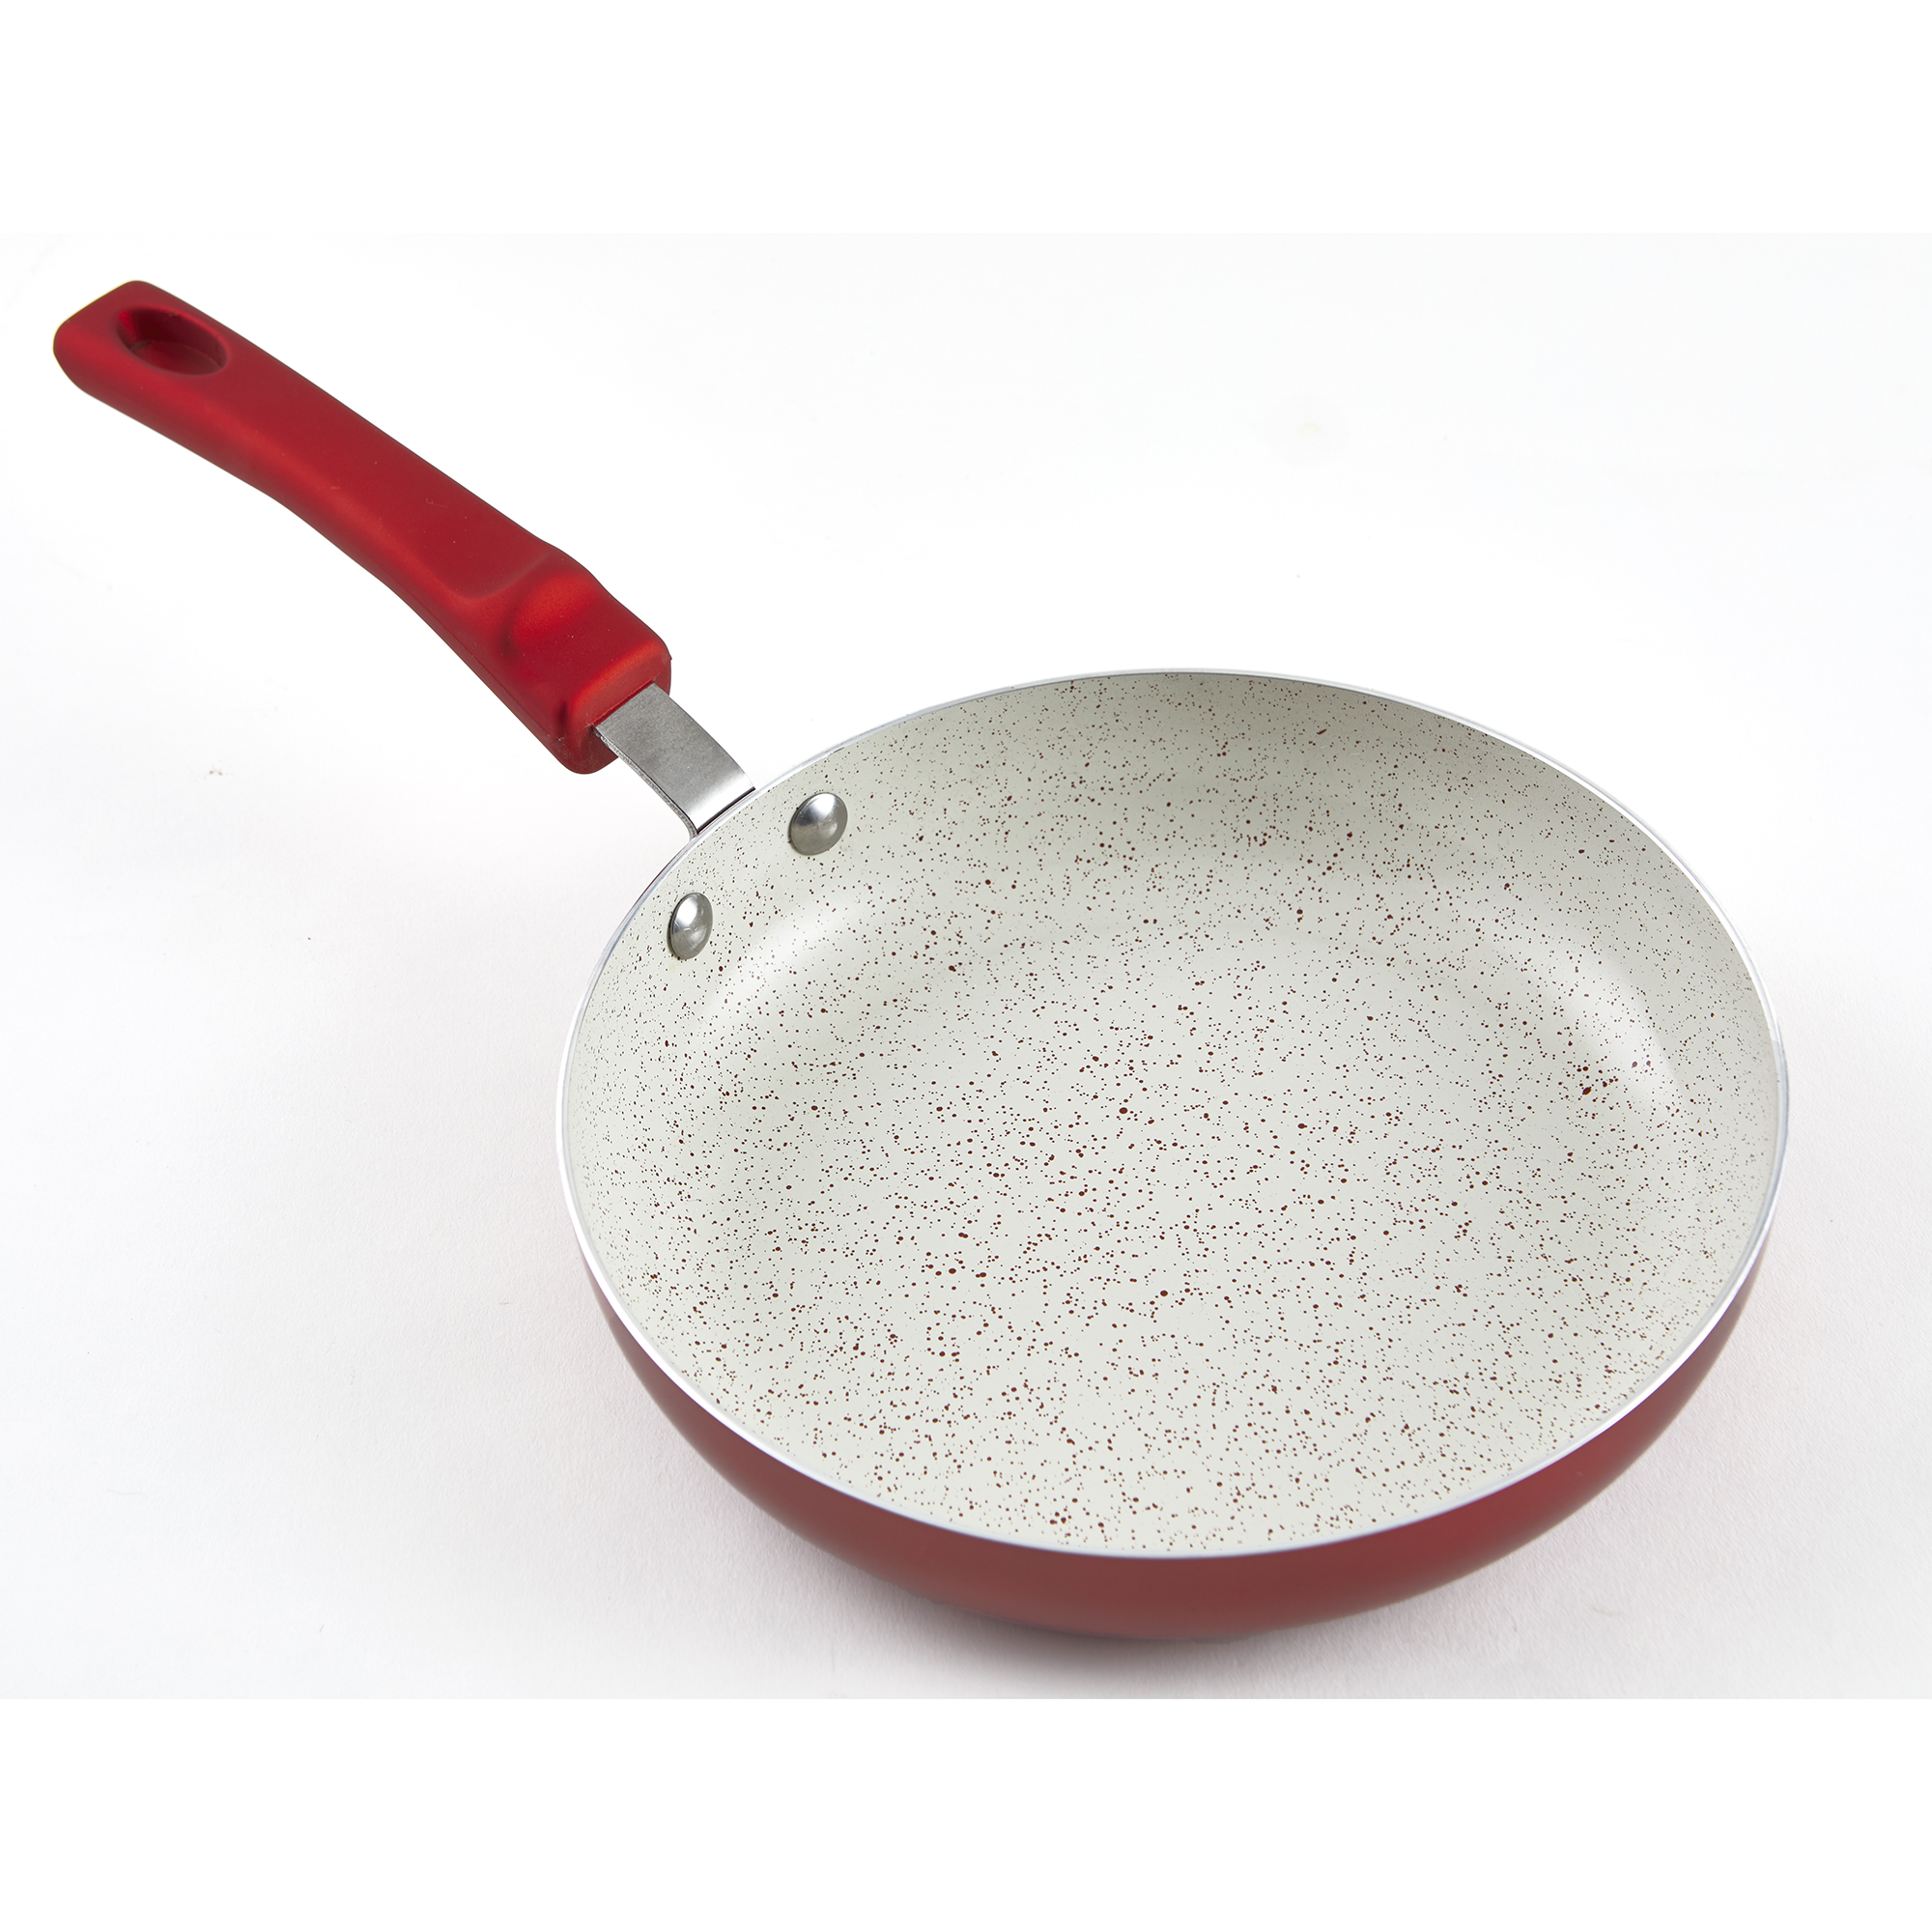 IMUSA IMUSA Ceramic PTFE Nonstick Speckled Saute Pan with Soft Touch Handle  10 Inch, Ruby Red - IMUSA